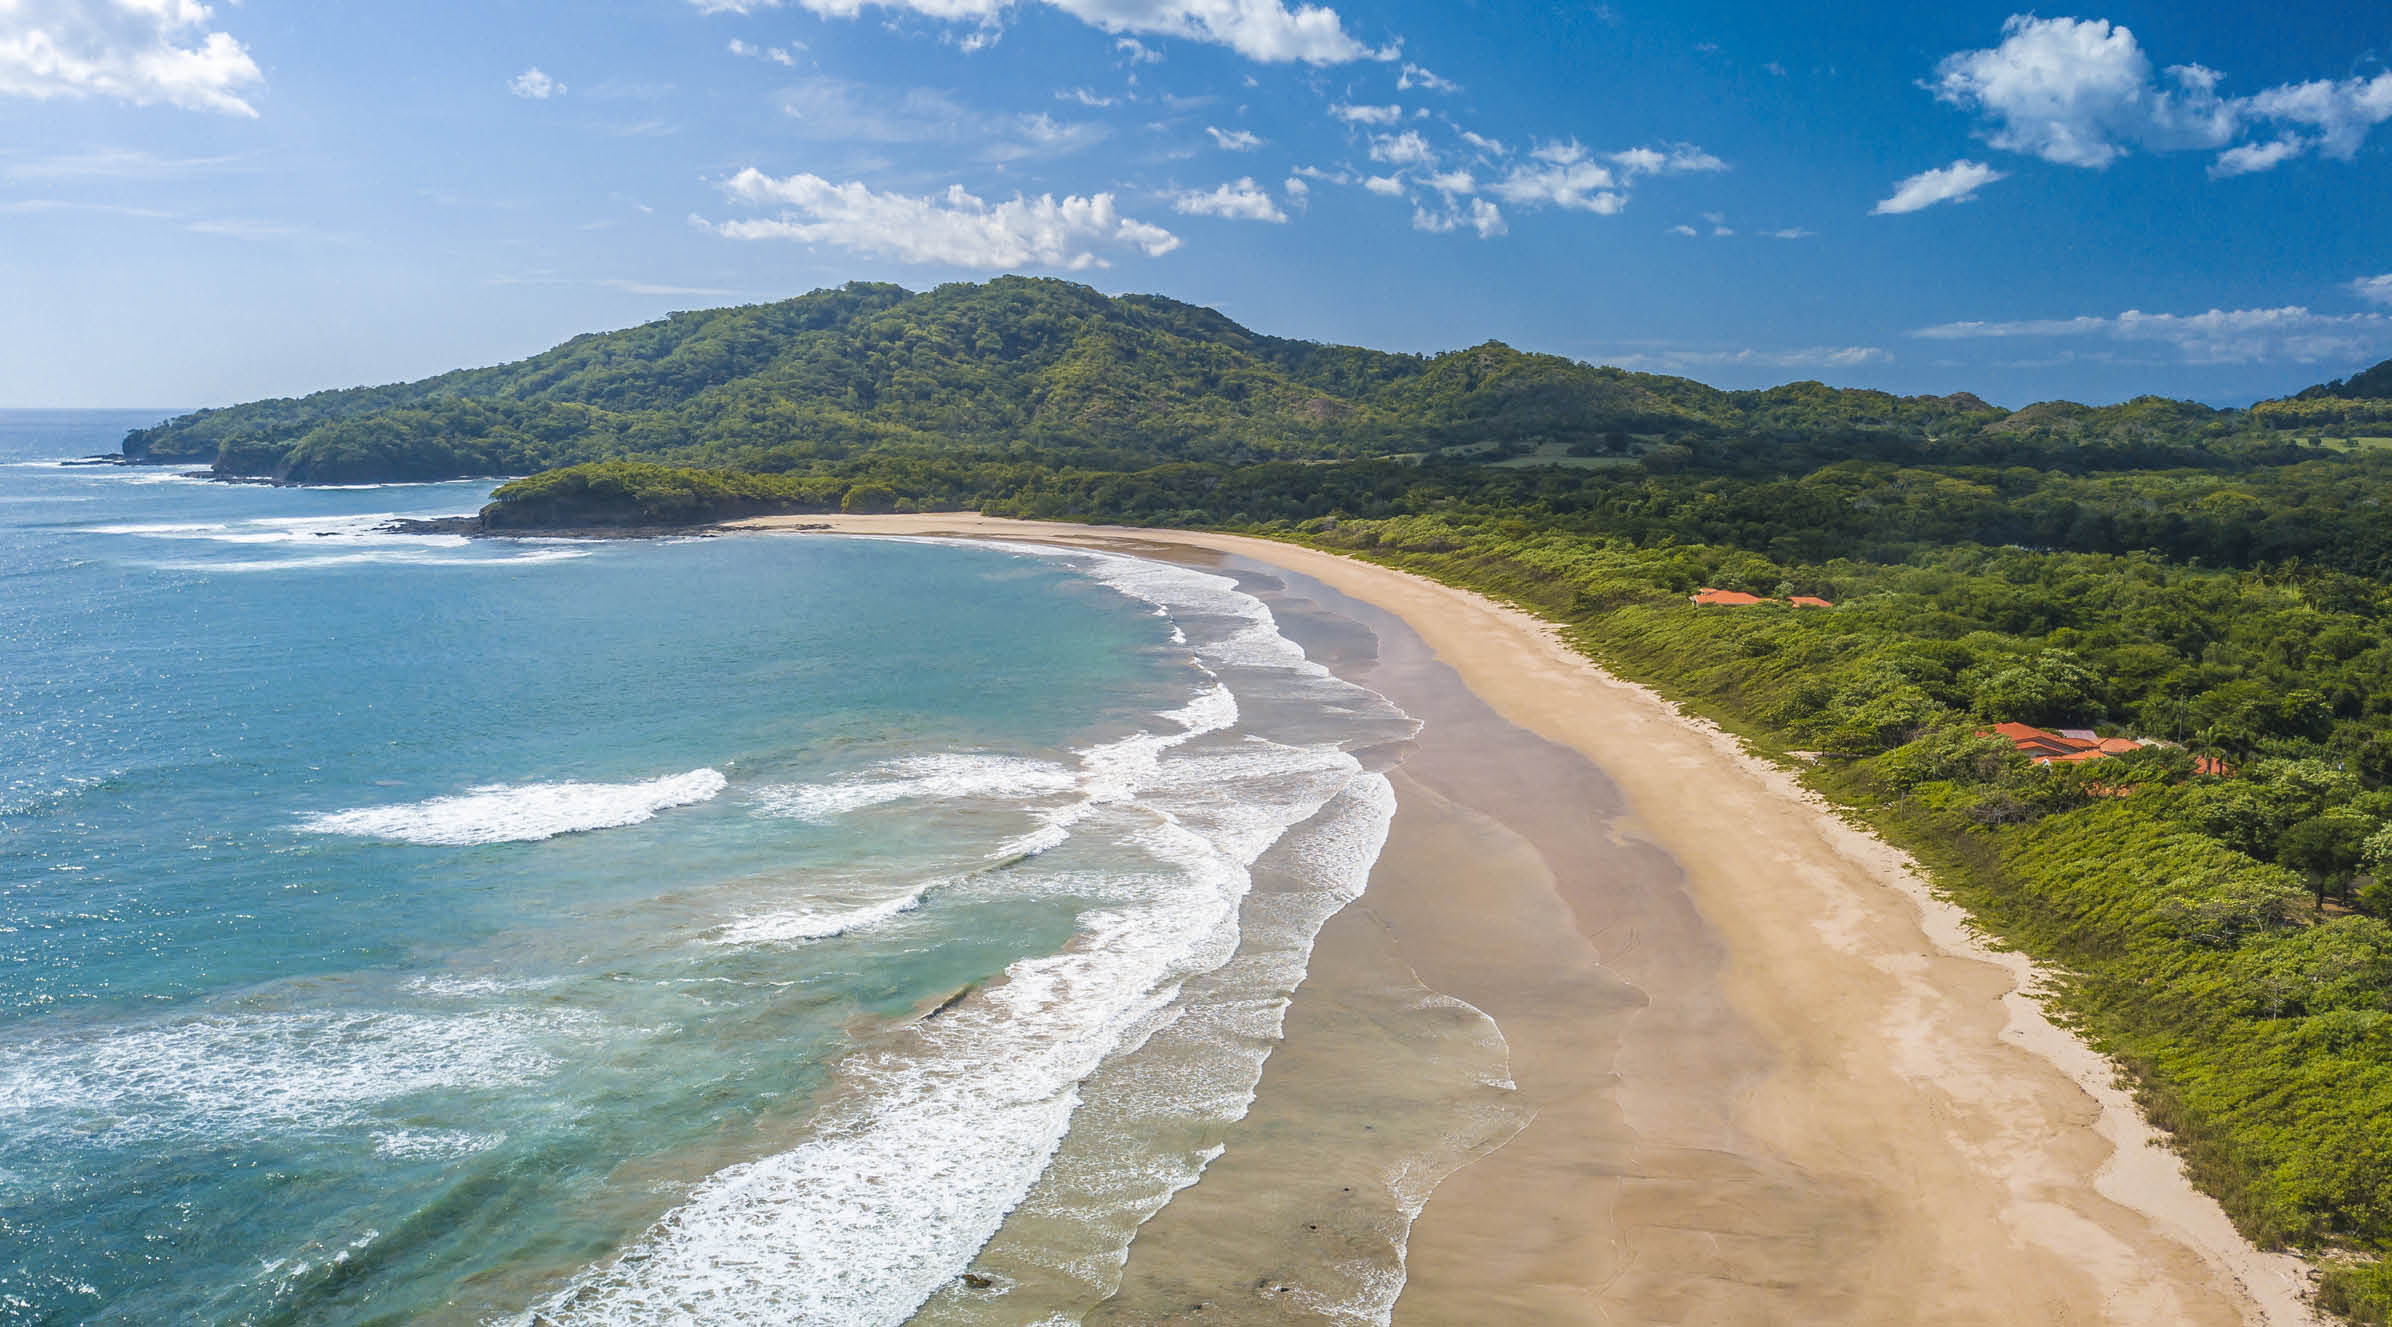 Costa Rica Best Beach: Playa Grande, Guanacaste - Aerial Drone View of Tropical White Sand Beach - Famous Surfing Location with big Waves, lush green Mountains, blue Sky and beautiful Landscape.